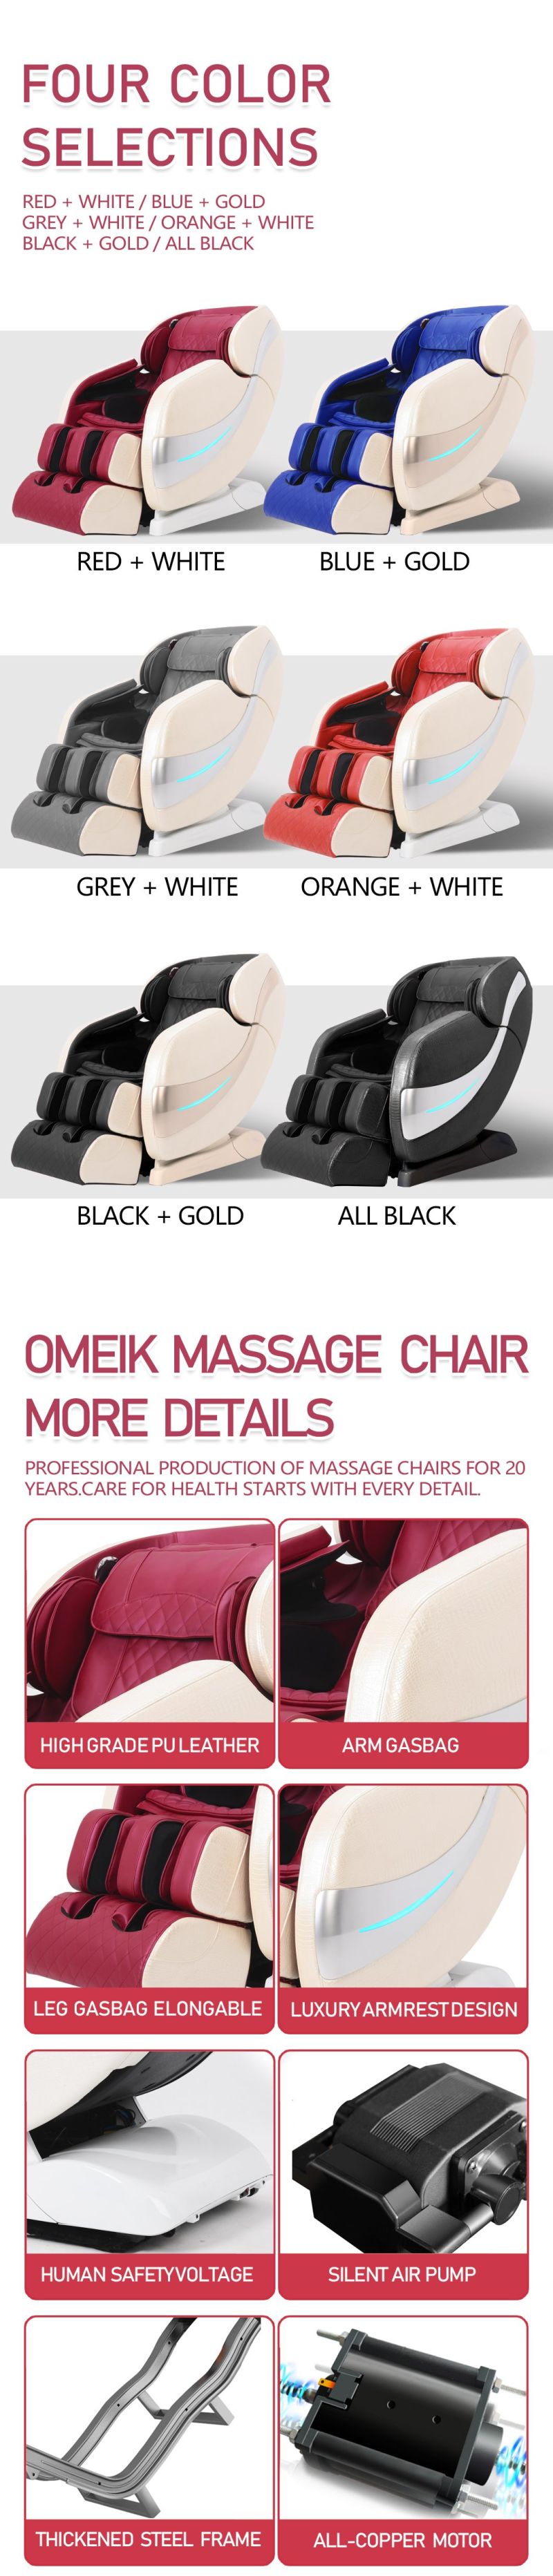 Top Quality Health Care Massage Machine Luxury Foot Massager Full Body Massage Chair for Body Relaxing